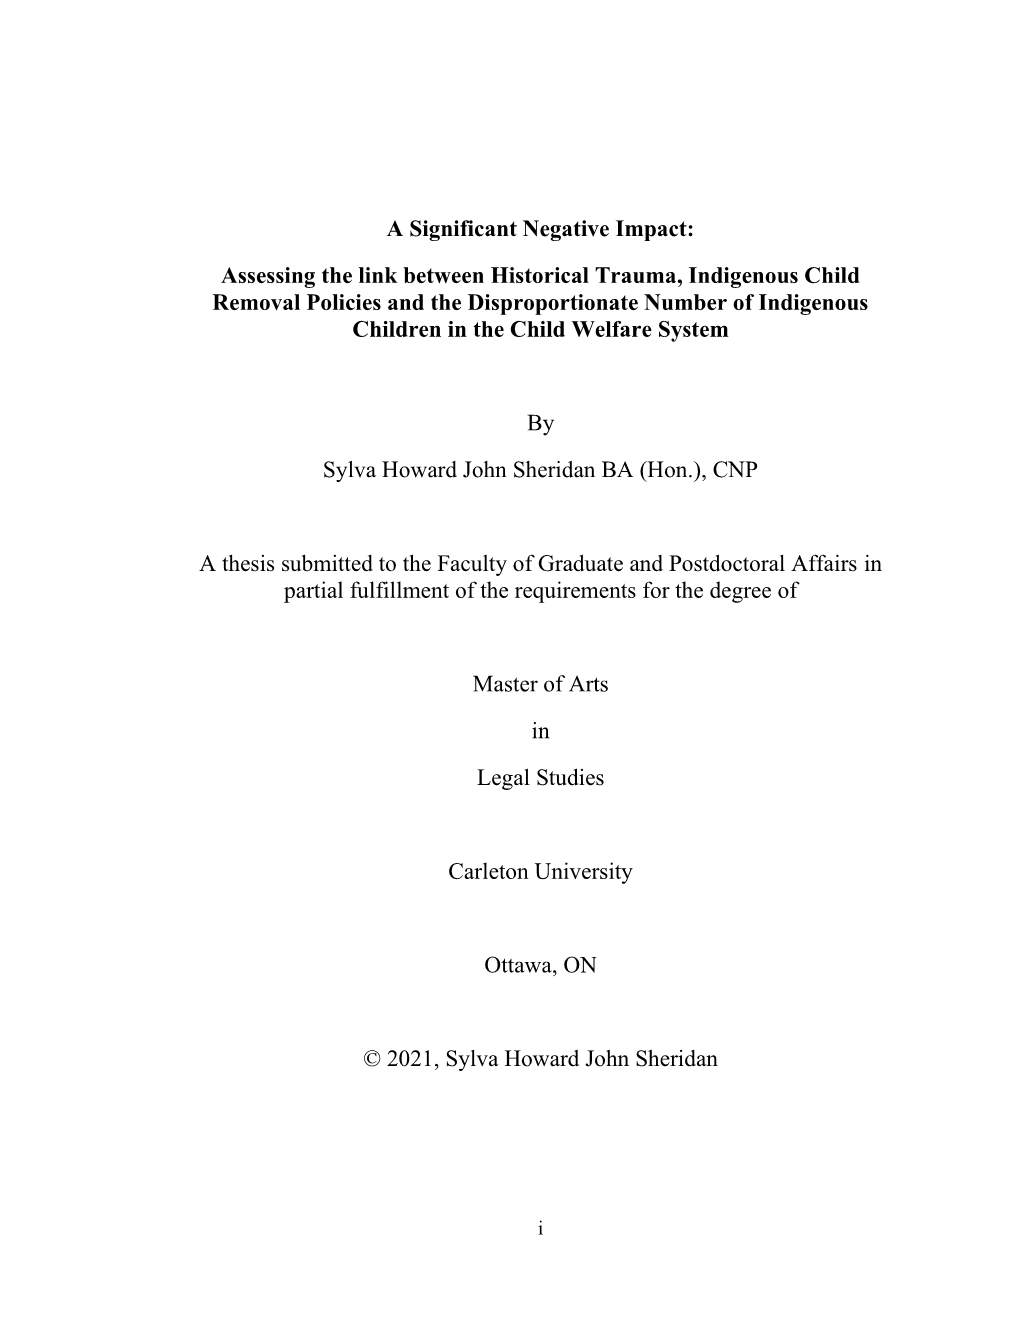 Assessing the Link Between Historical Trauma, Indigenous Child Removal Policies and the Disproportionate Number of Indigenous Children in the Child Welfare System